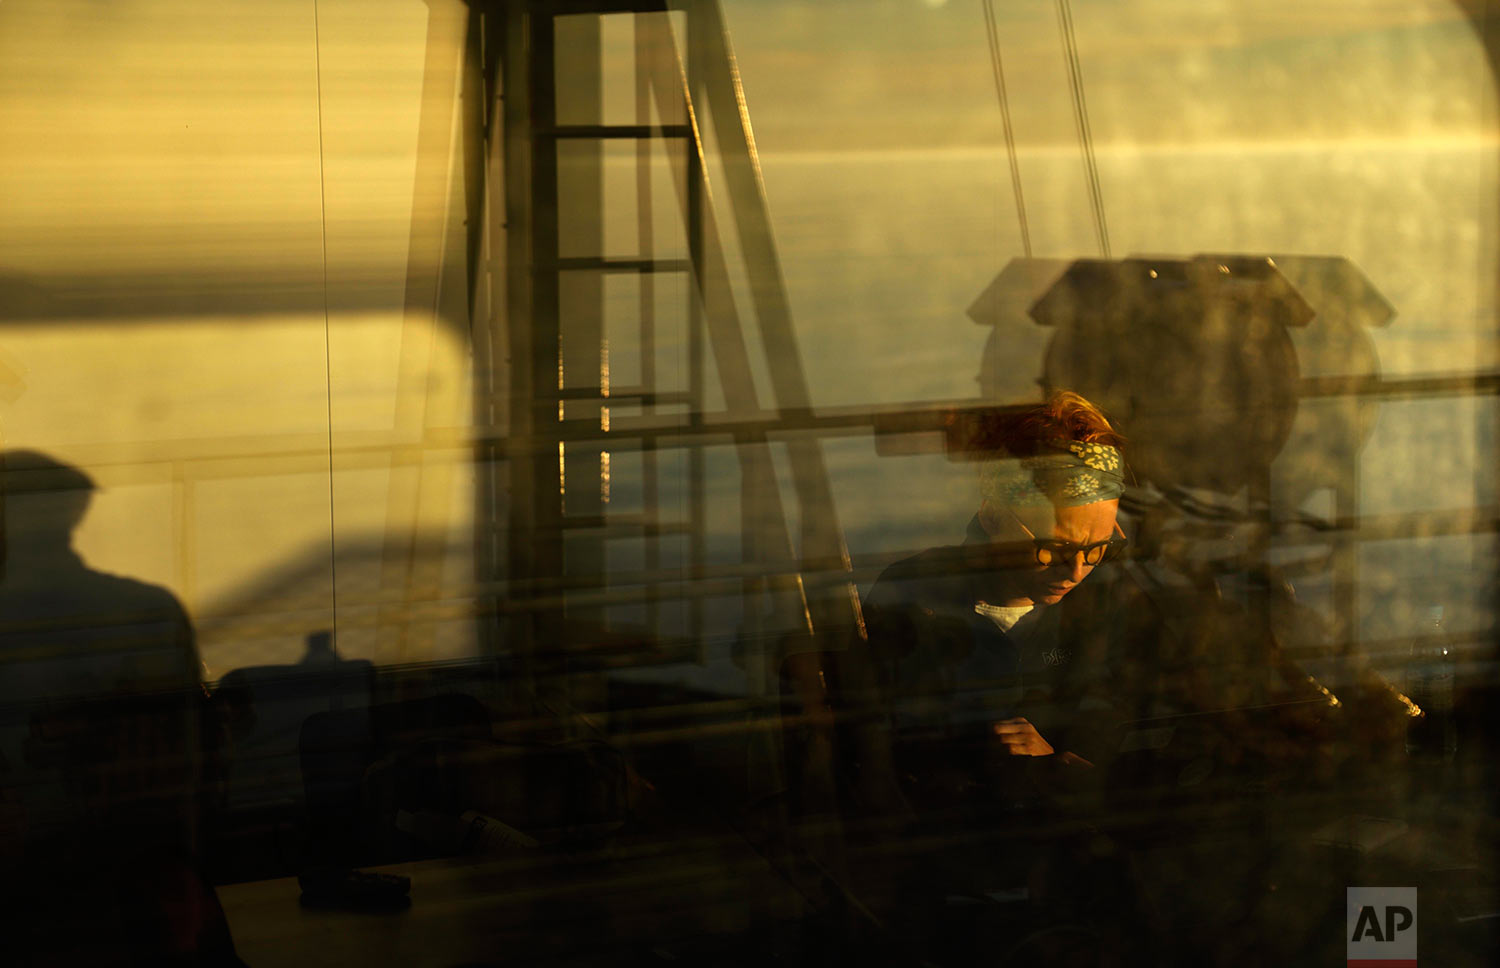  The sun shines through the window at midnight as researcher Ilona Mettiainen reads in a room overlooking an observation deck on the Finnish icebreaker MSV Nordica as it sails the Bering Sea toward the Canadian Arctic Archipelago to traverse the Nort